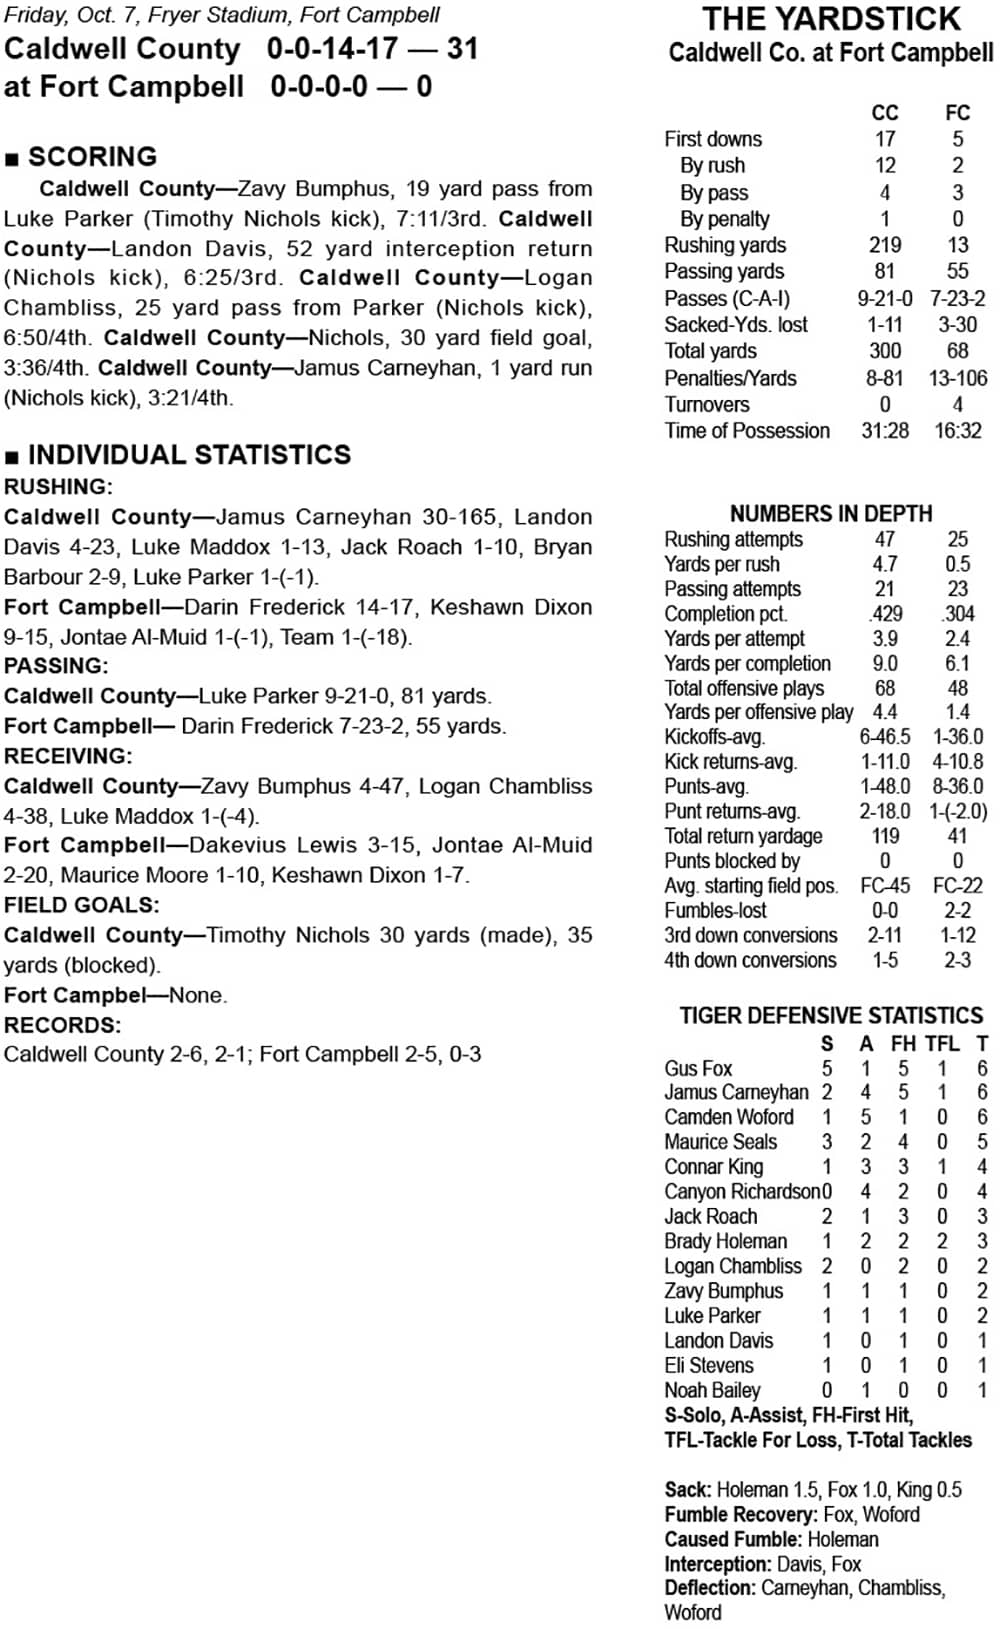 GAME STATS Caldwell County at Fort Campbell Your Sports Edge 2021